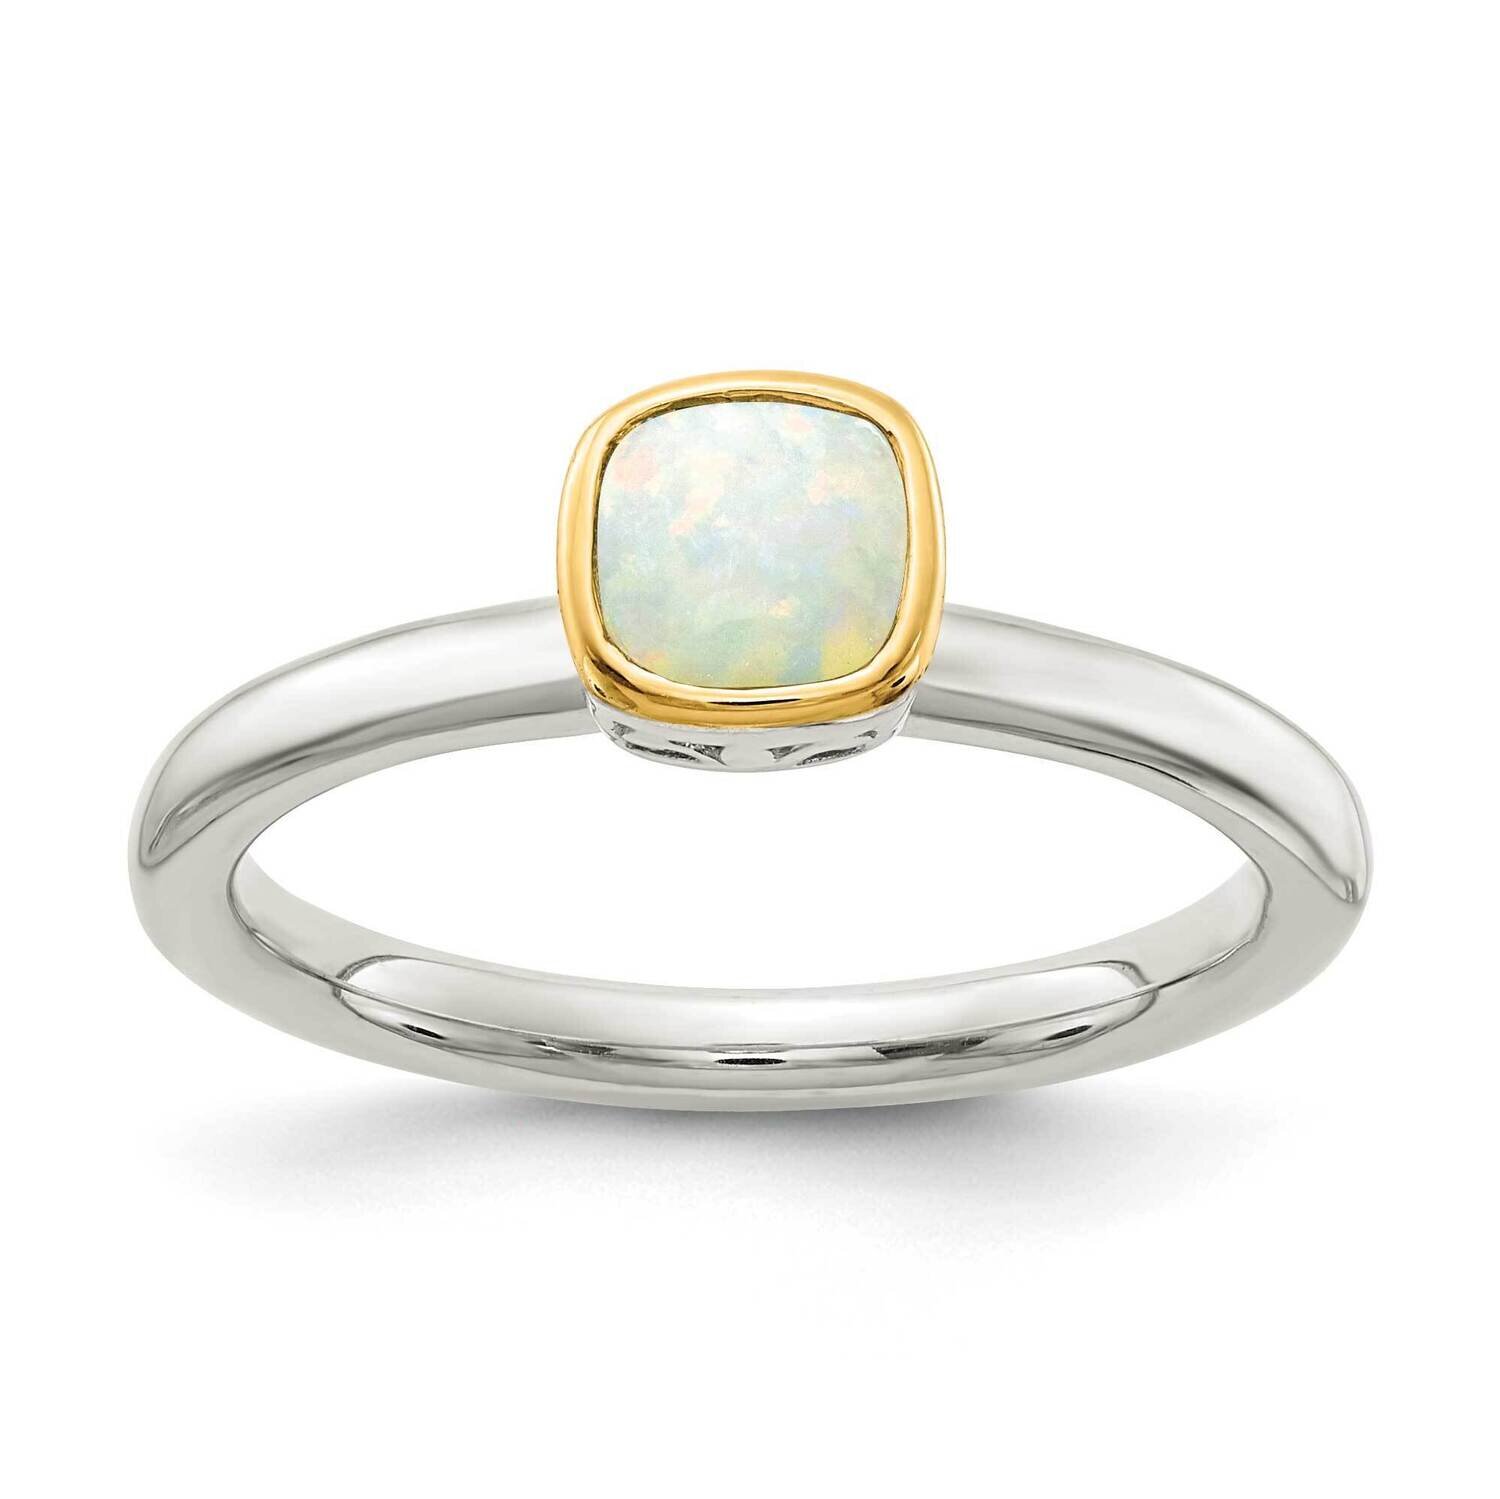 Milky Opal Ring Sterling Silver with 14k Gold Accent QTC1737